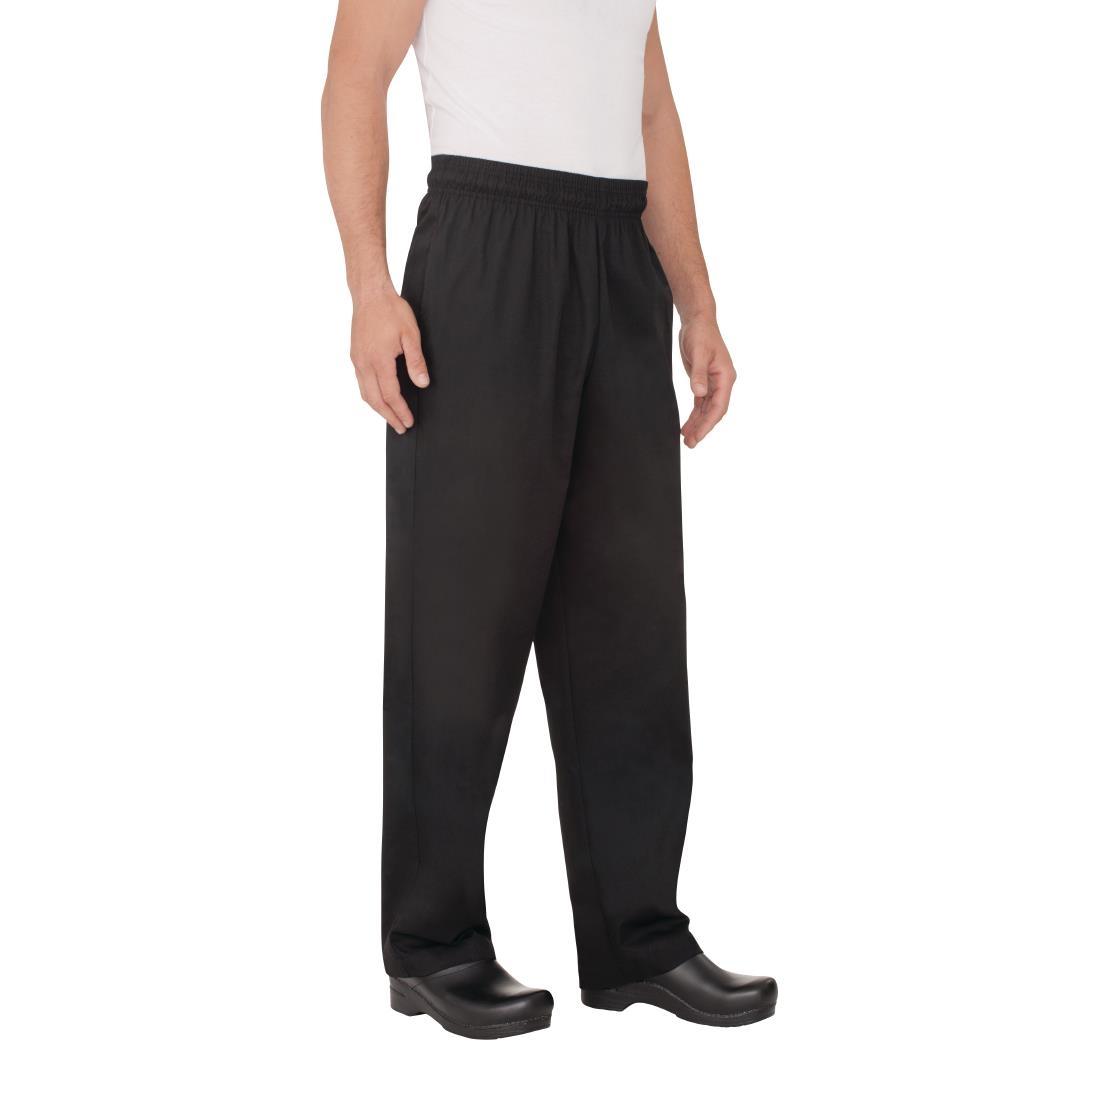 Chef Works Essential Baggy Trousers Black 3XL - A029-3XL  - 4